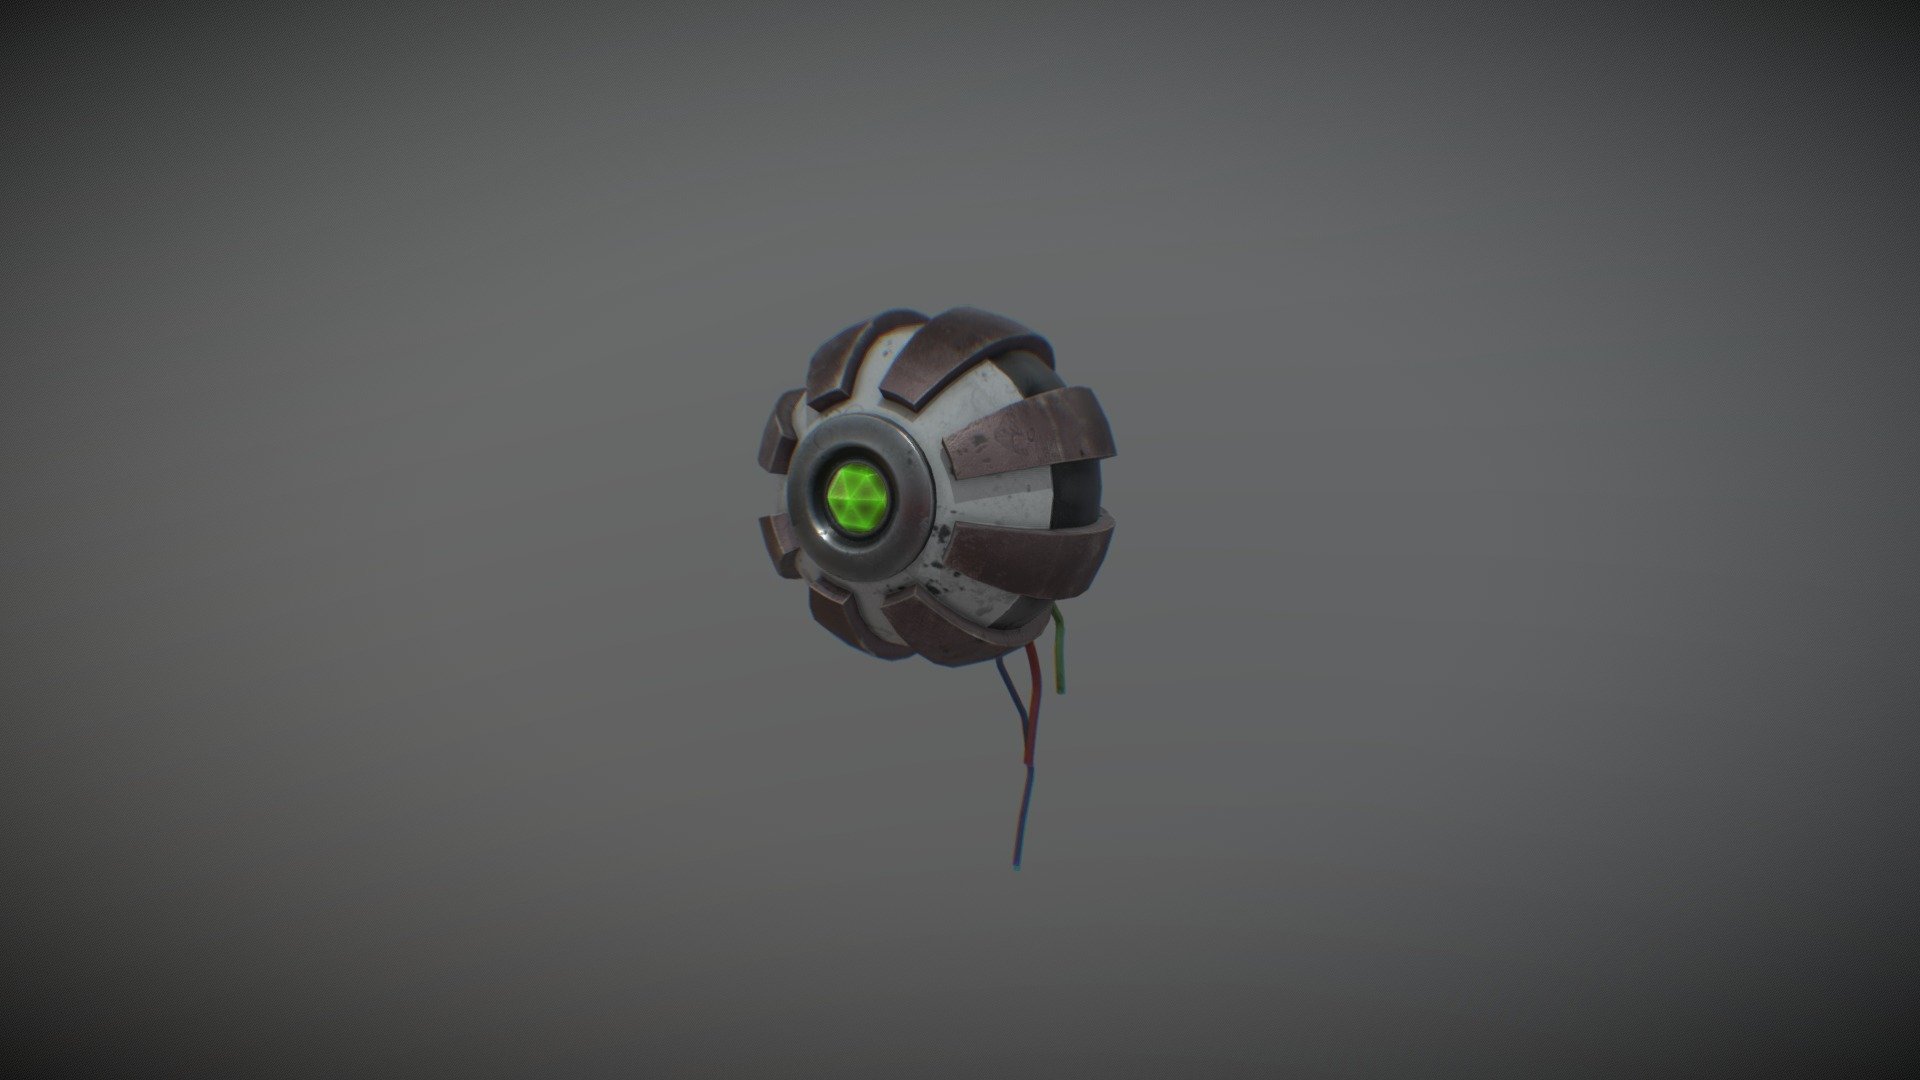 An Old Robot Eye - Old Robot Eye - 3D model by Rico Peters (@ryko777) 3d model